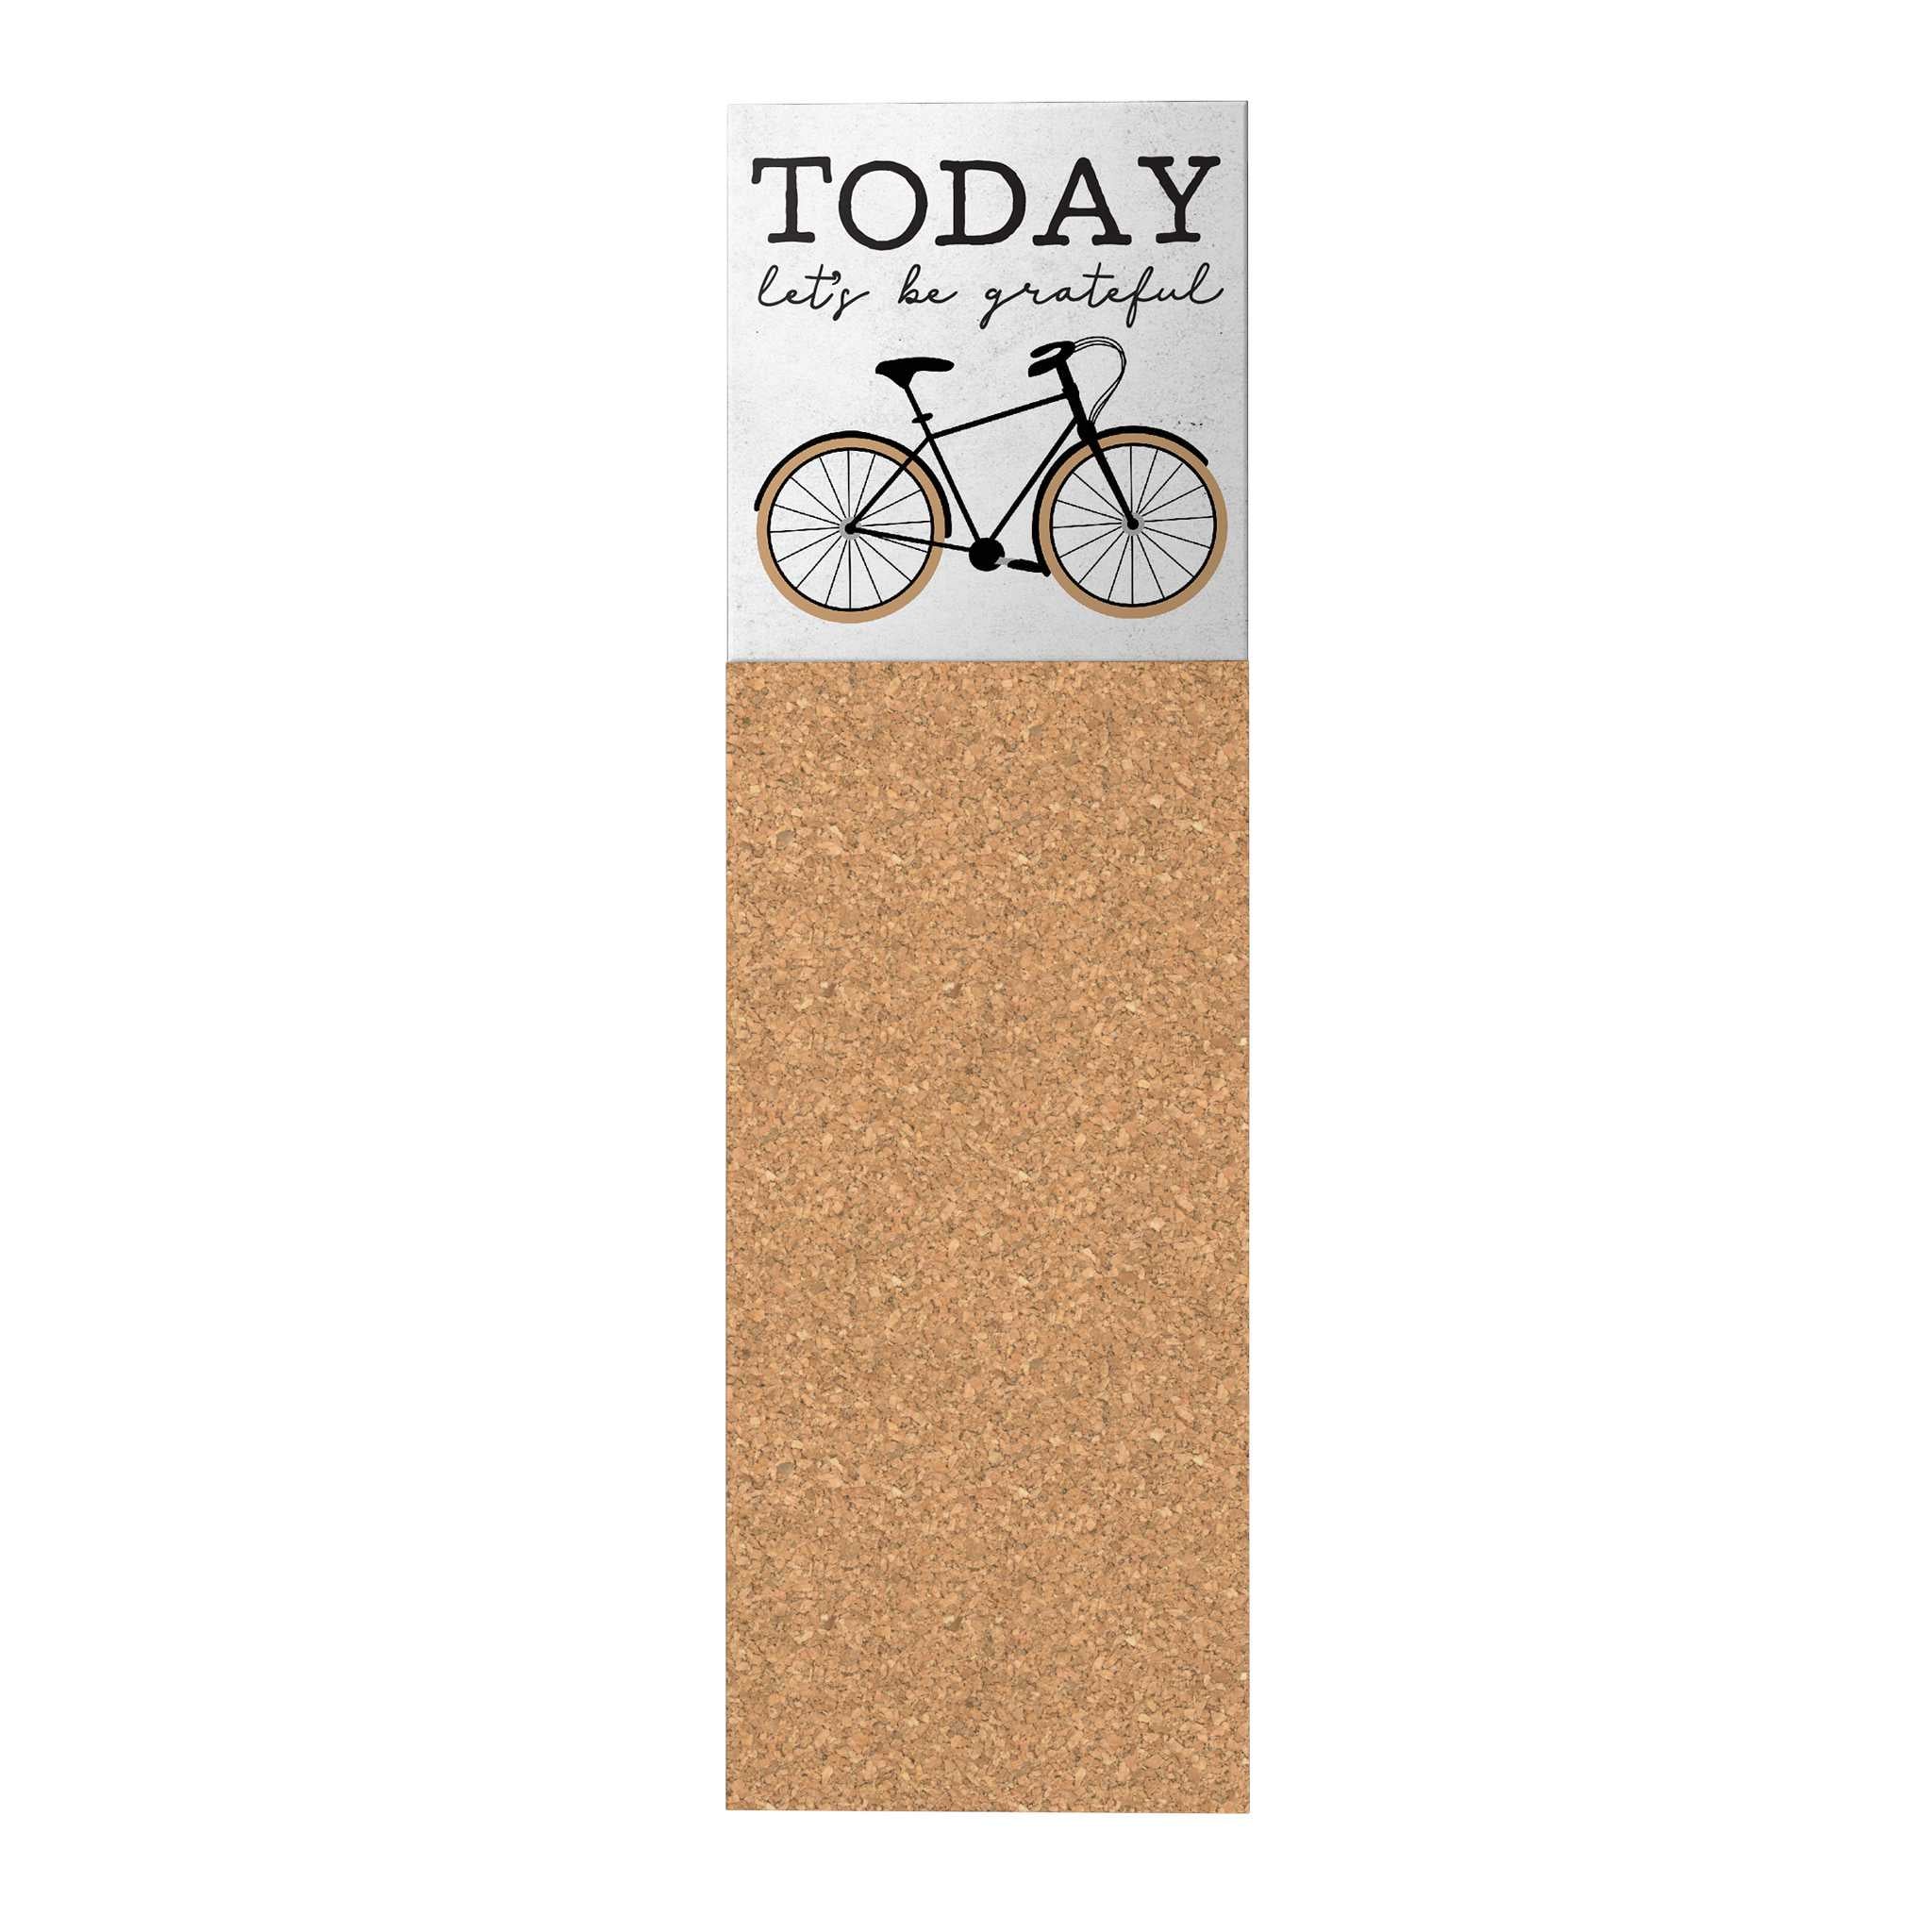 Everyday Things Corkboard [CLEARANCE]